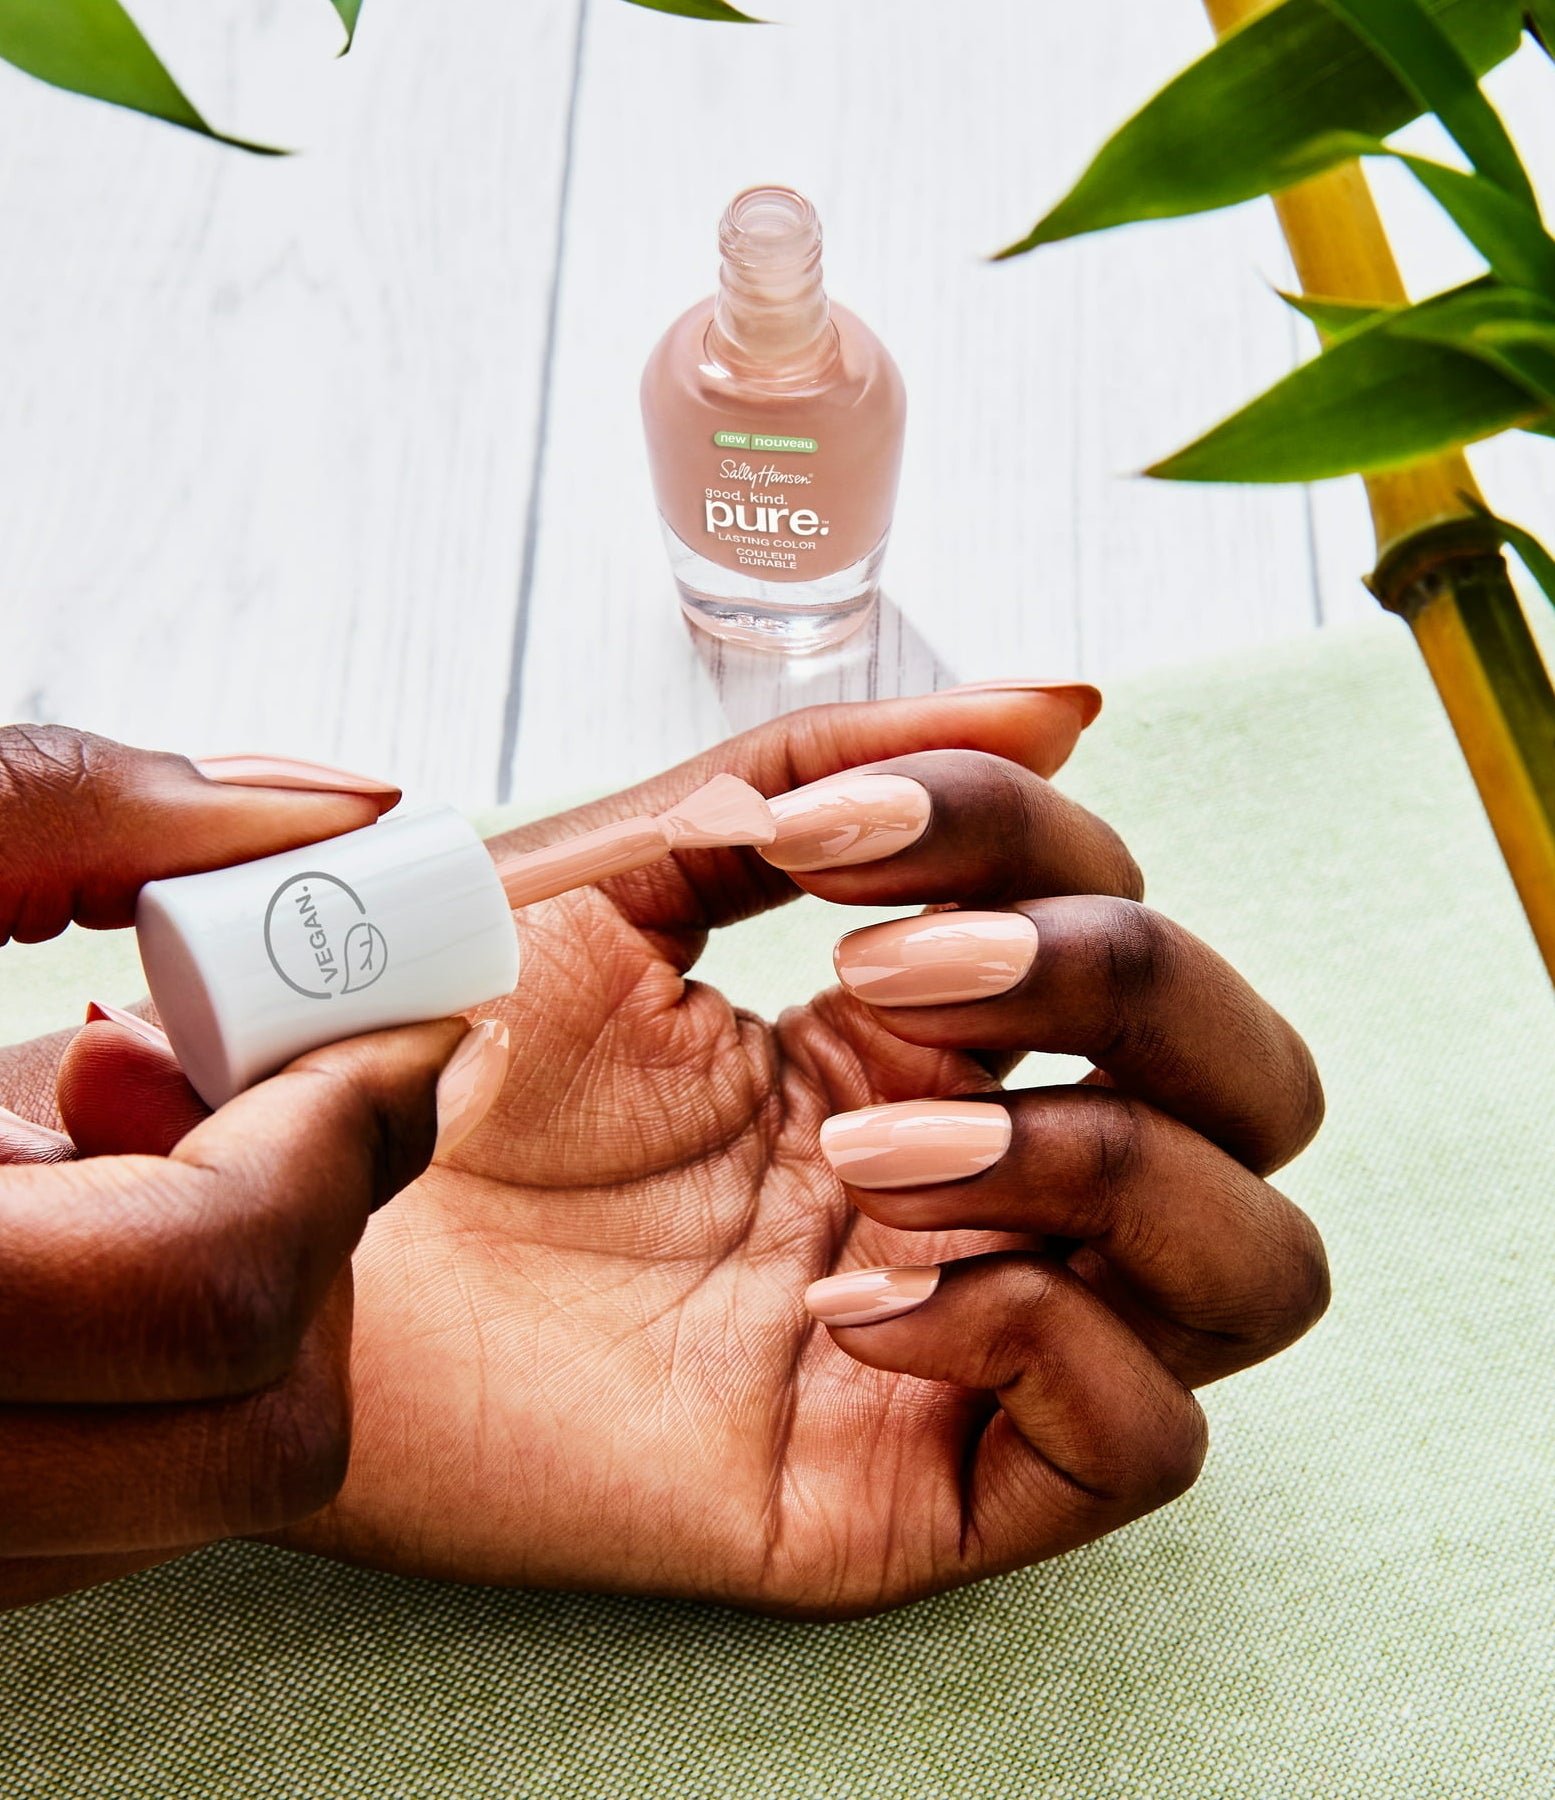 A model using a nude shade on their nails